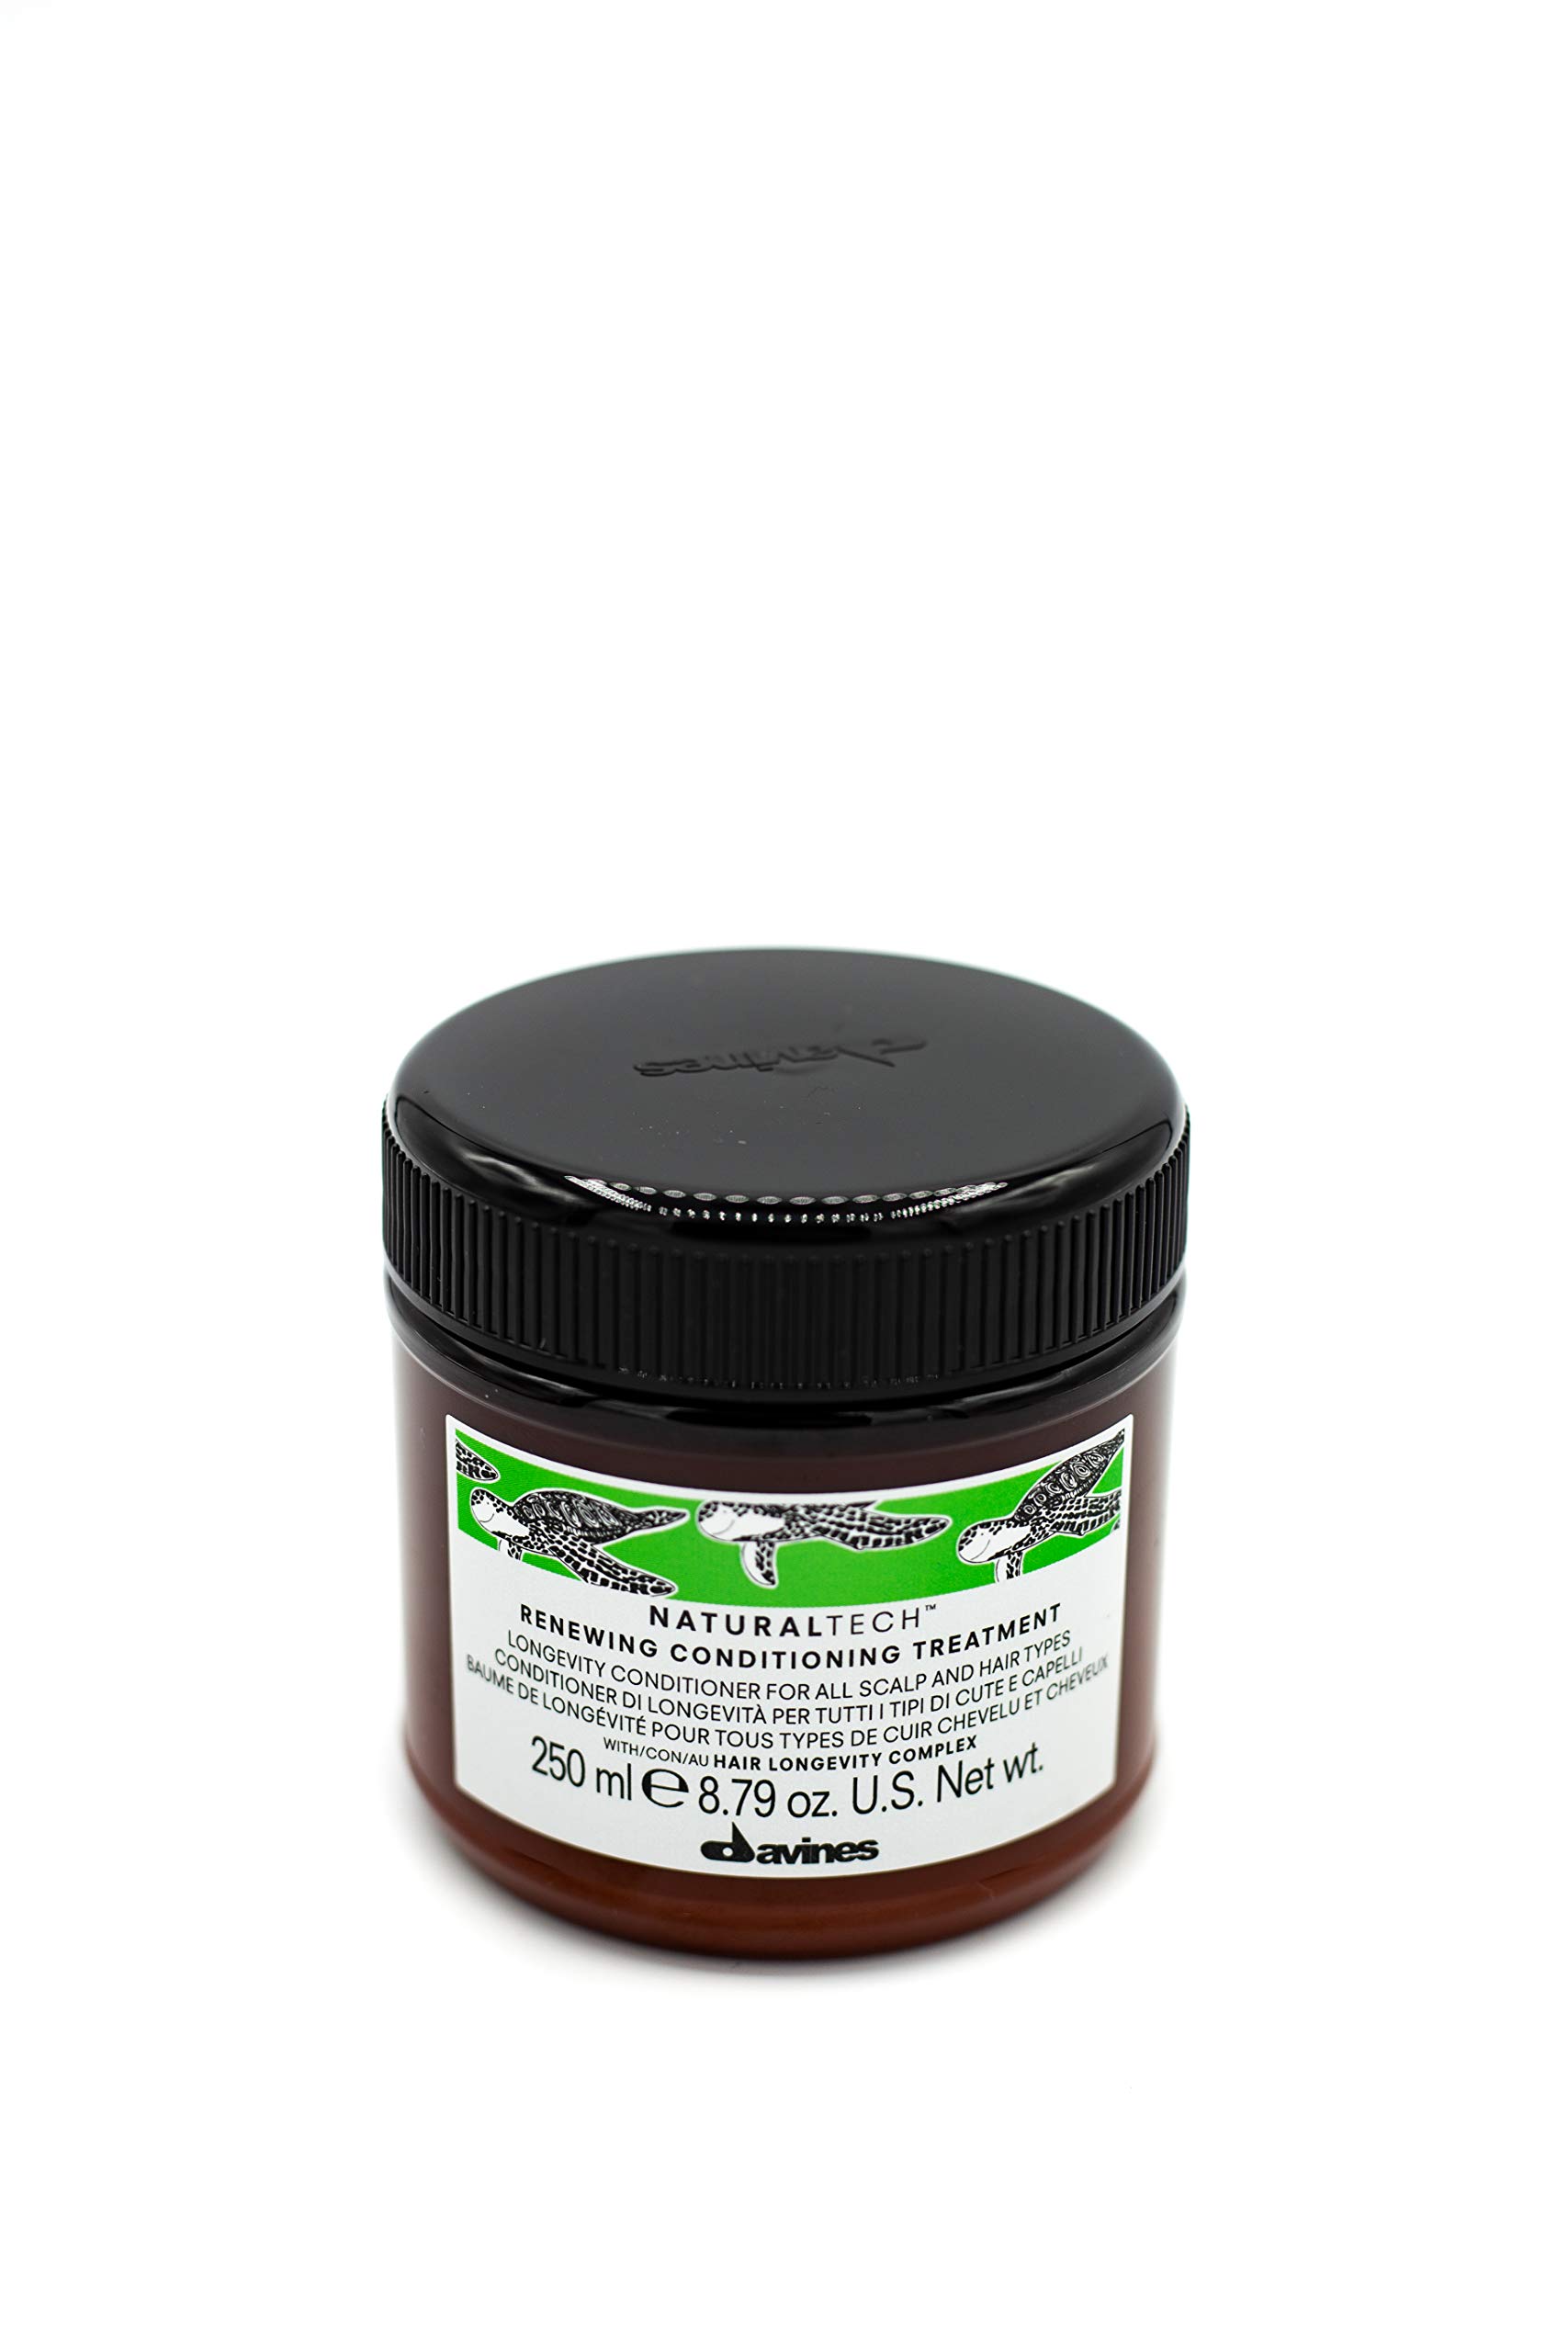 Davines Naturaltech RENEWING Conditioner, Gentle Nourishing And Moisturizing Action To Promote The Wellbeing Of The Scalp, 8.79 fl. oz.